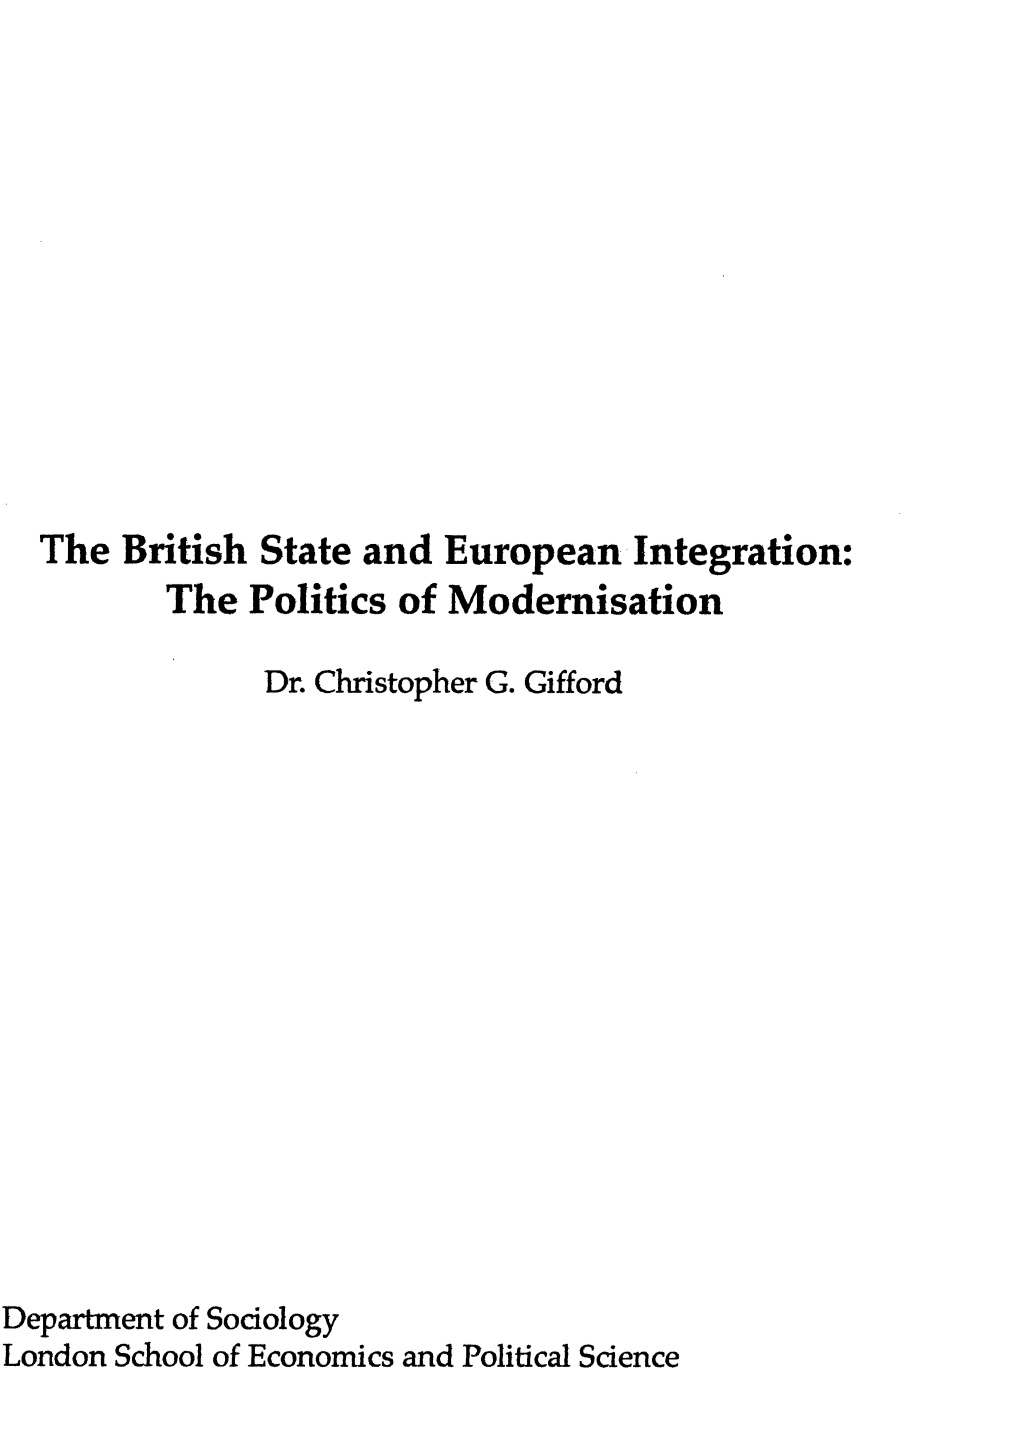 The British State and European Integration the Politics Of